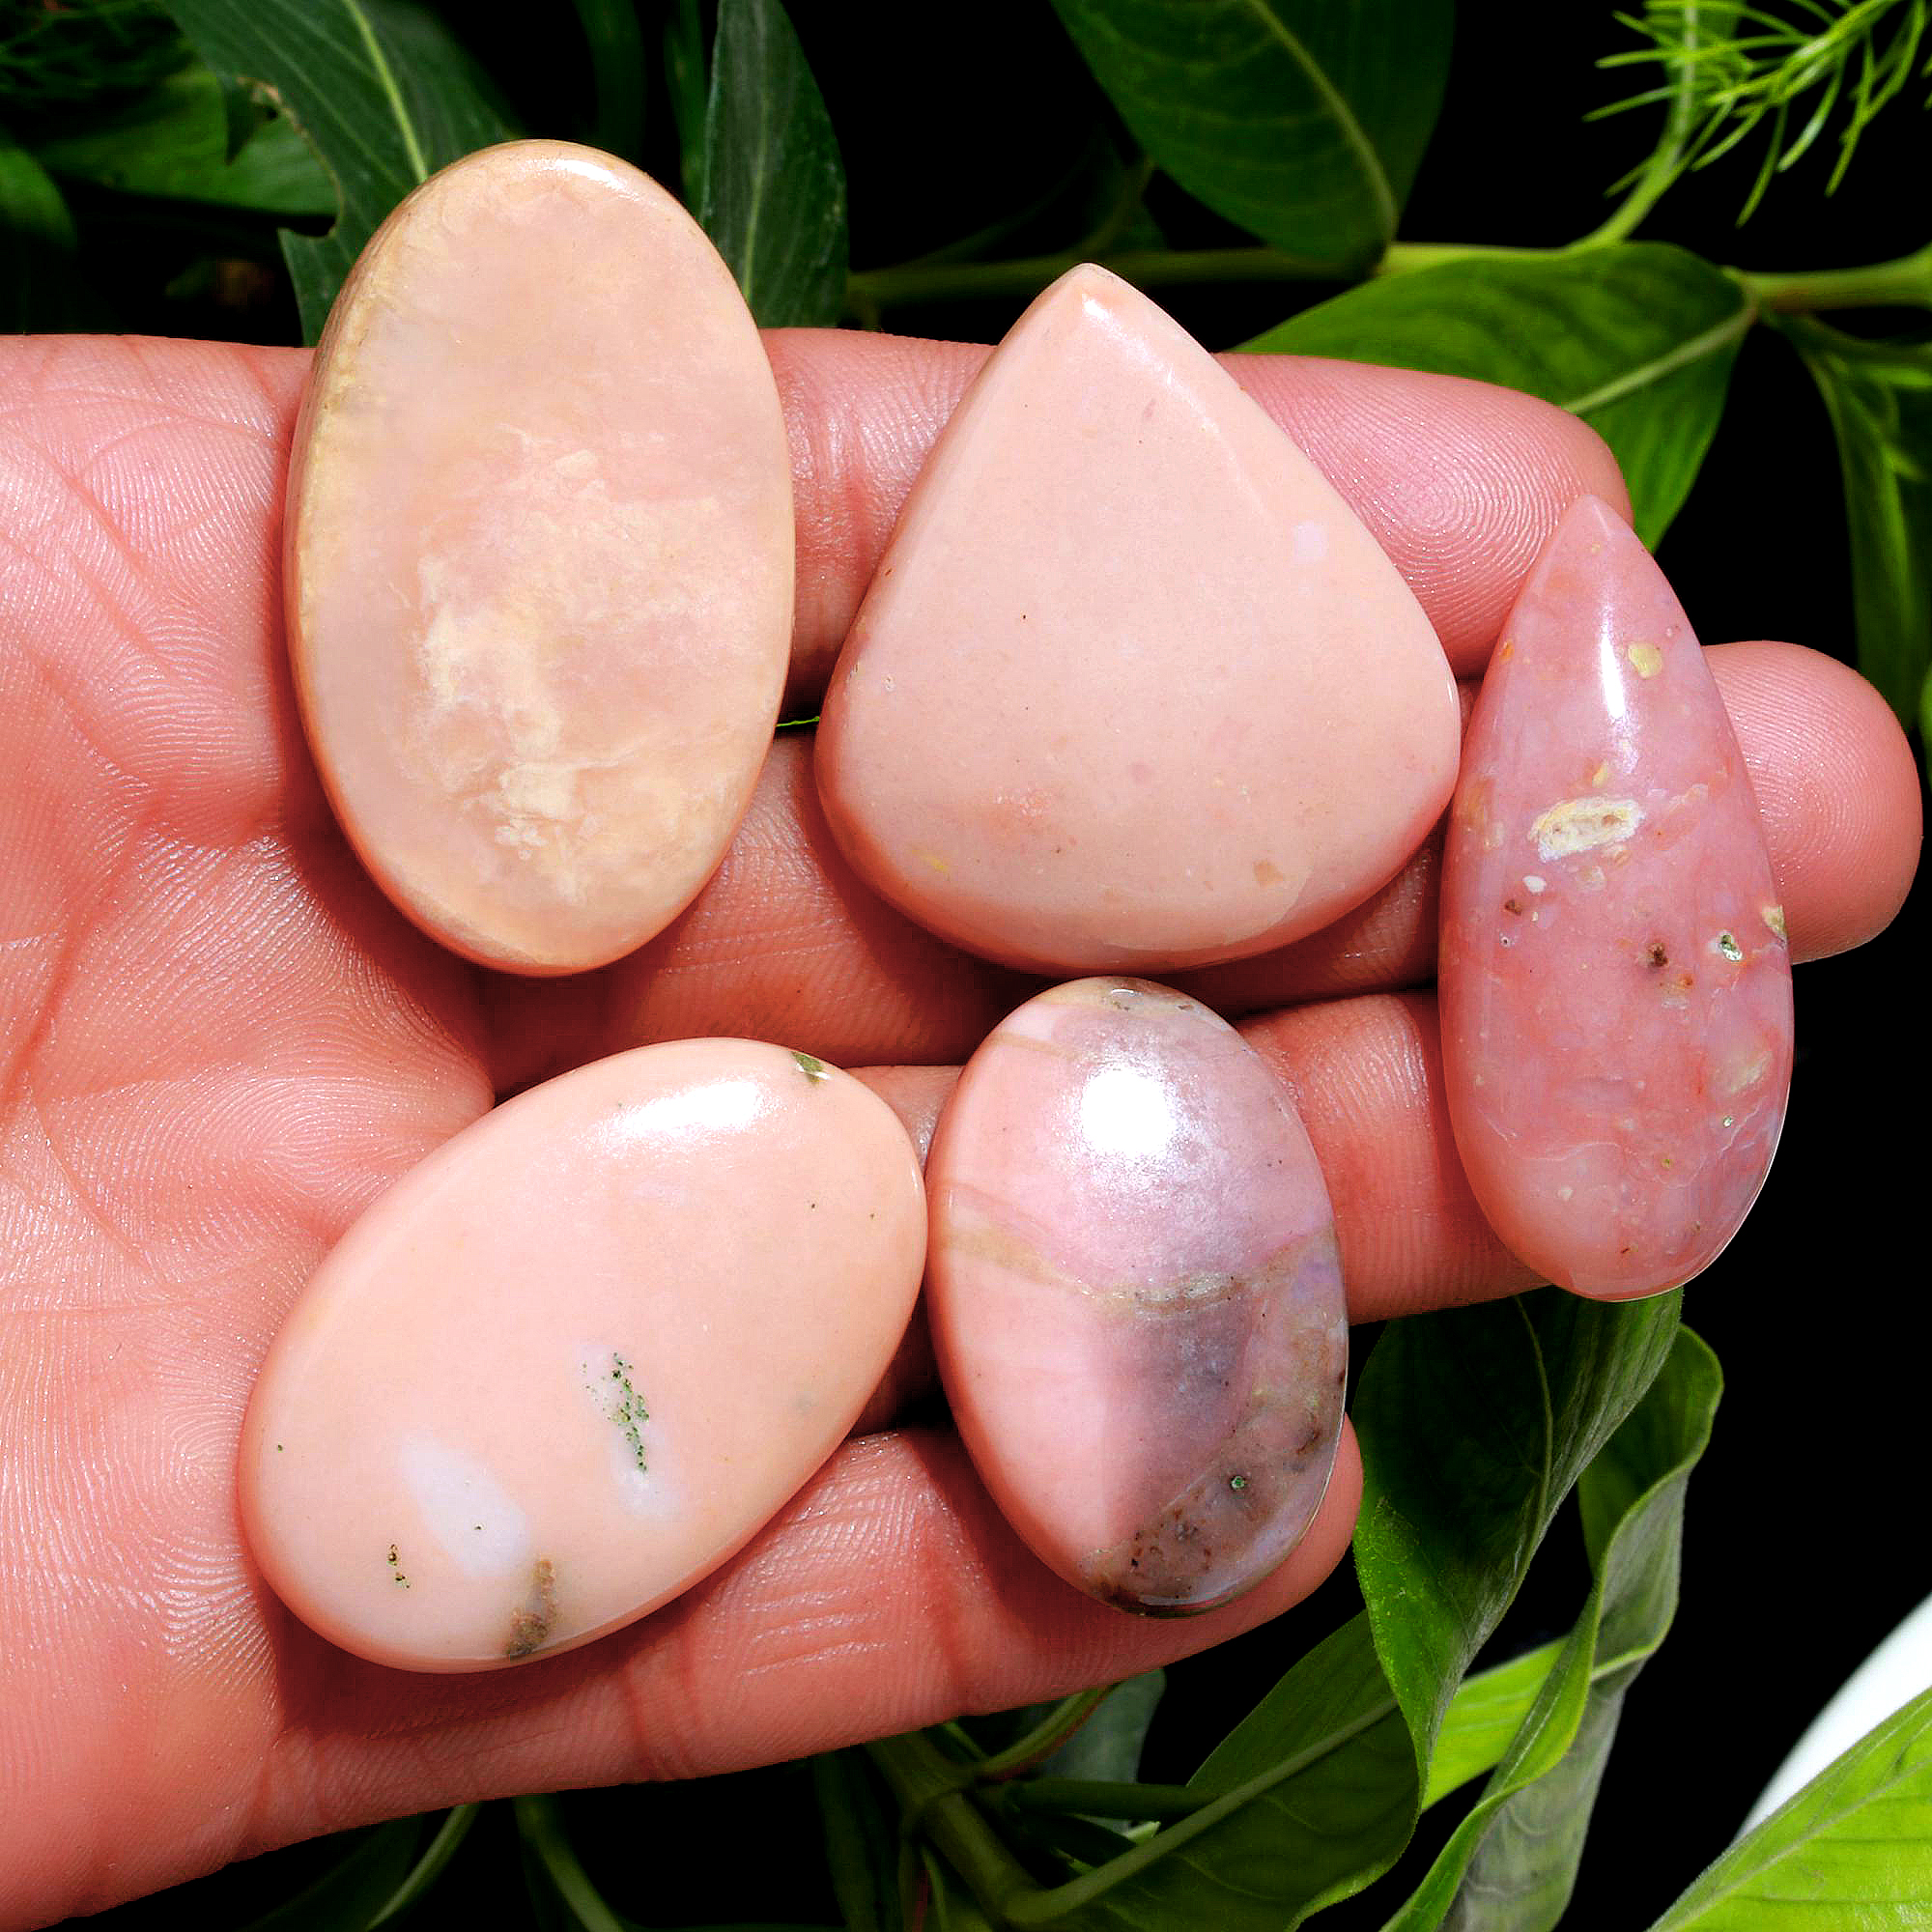 625.Cts 22 Pcs Natural Smooth Pink Opal Back Side Unpolished Mix Loose Gemstone Cabochon Wholesale Lot Size 40x24 23x20mm#1158